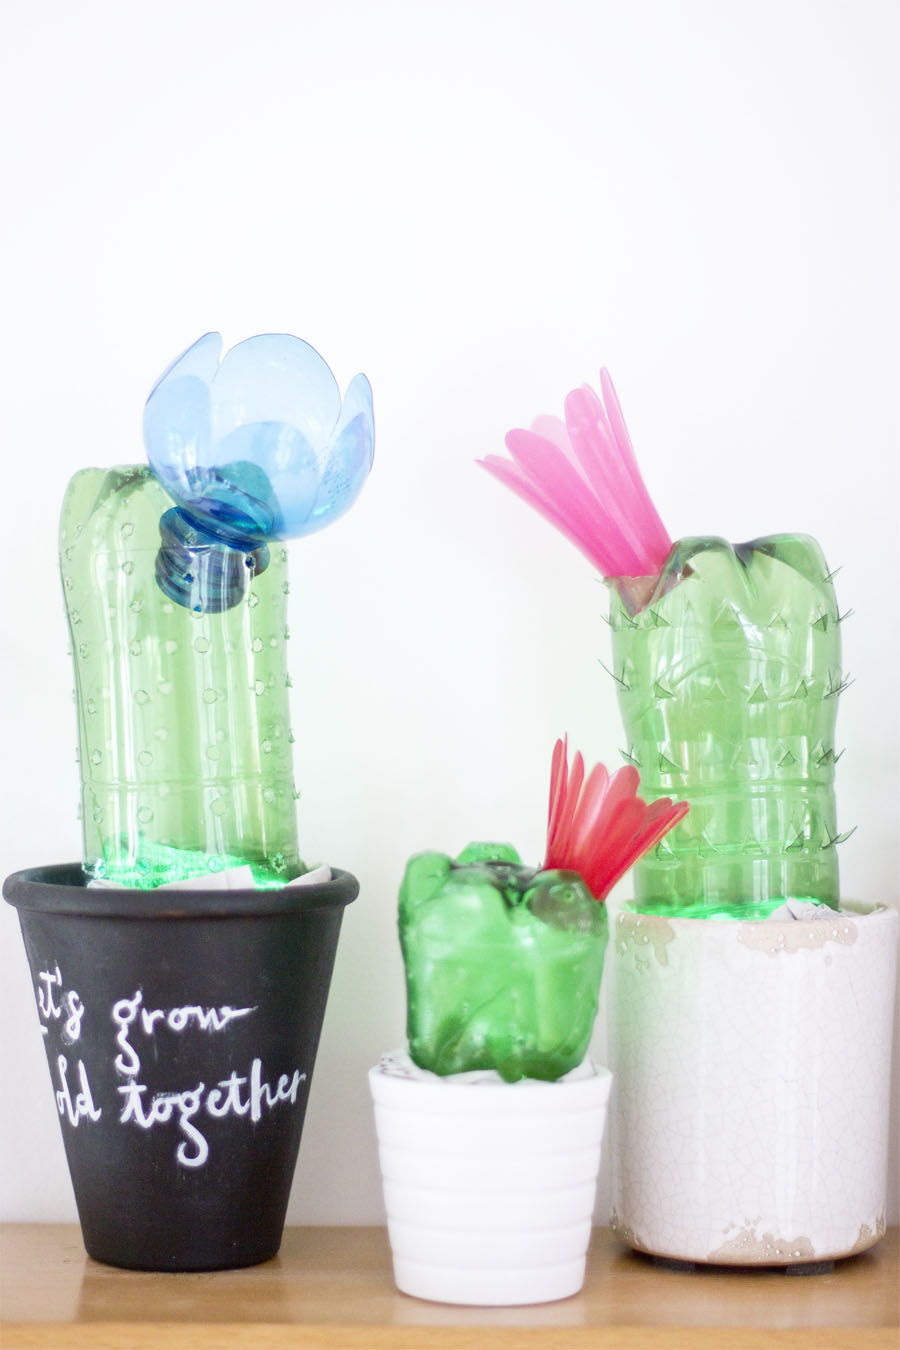 DIY-home-cedoration-upcycled-plastic-bottles-cactus